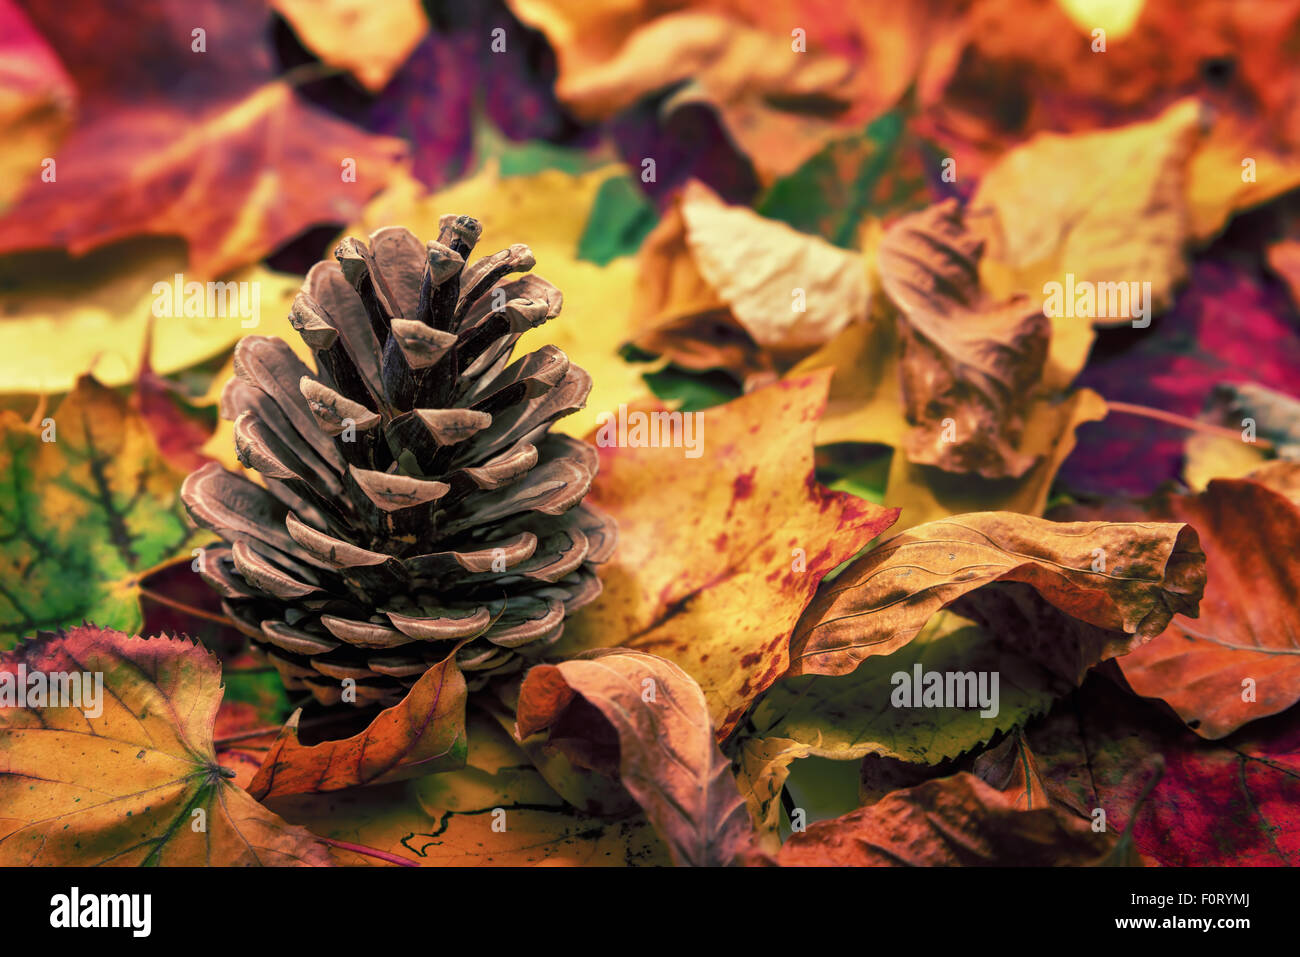 Studio closeup of a fir cone on colorful autumn leaves fallen to the ground Stock Photo